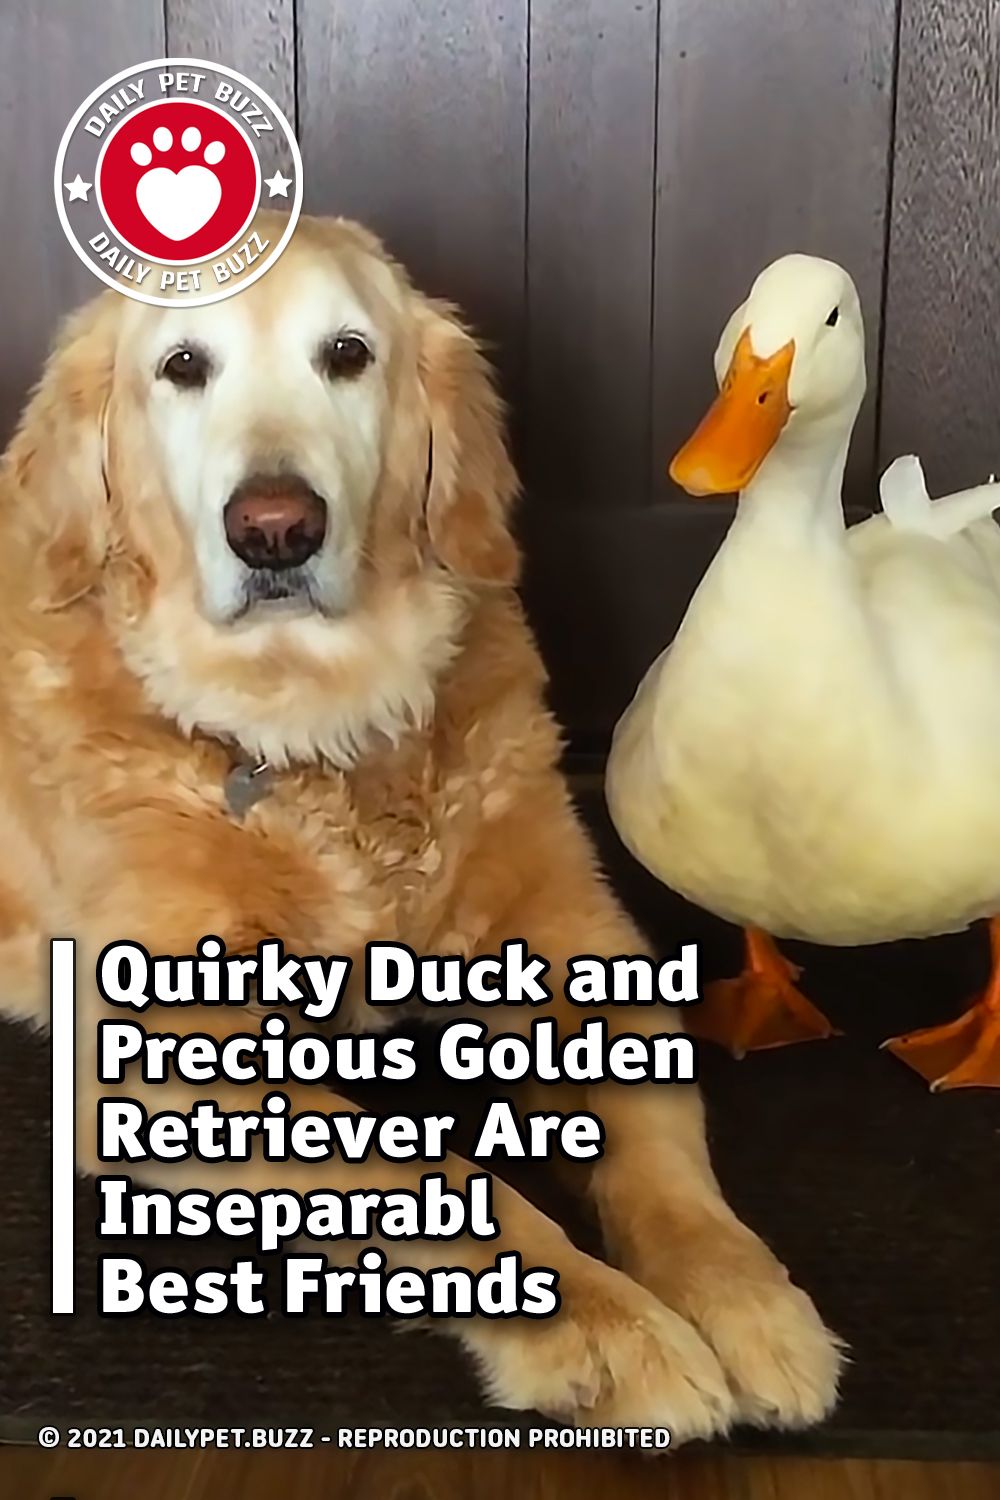 Quirky Duck and Precious Golden Retriever Are Inseparable Best Friends